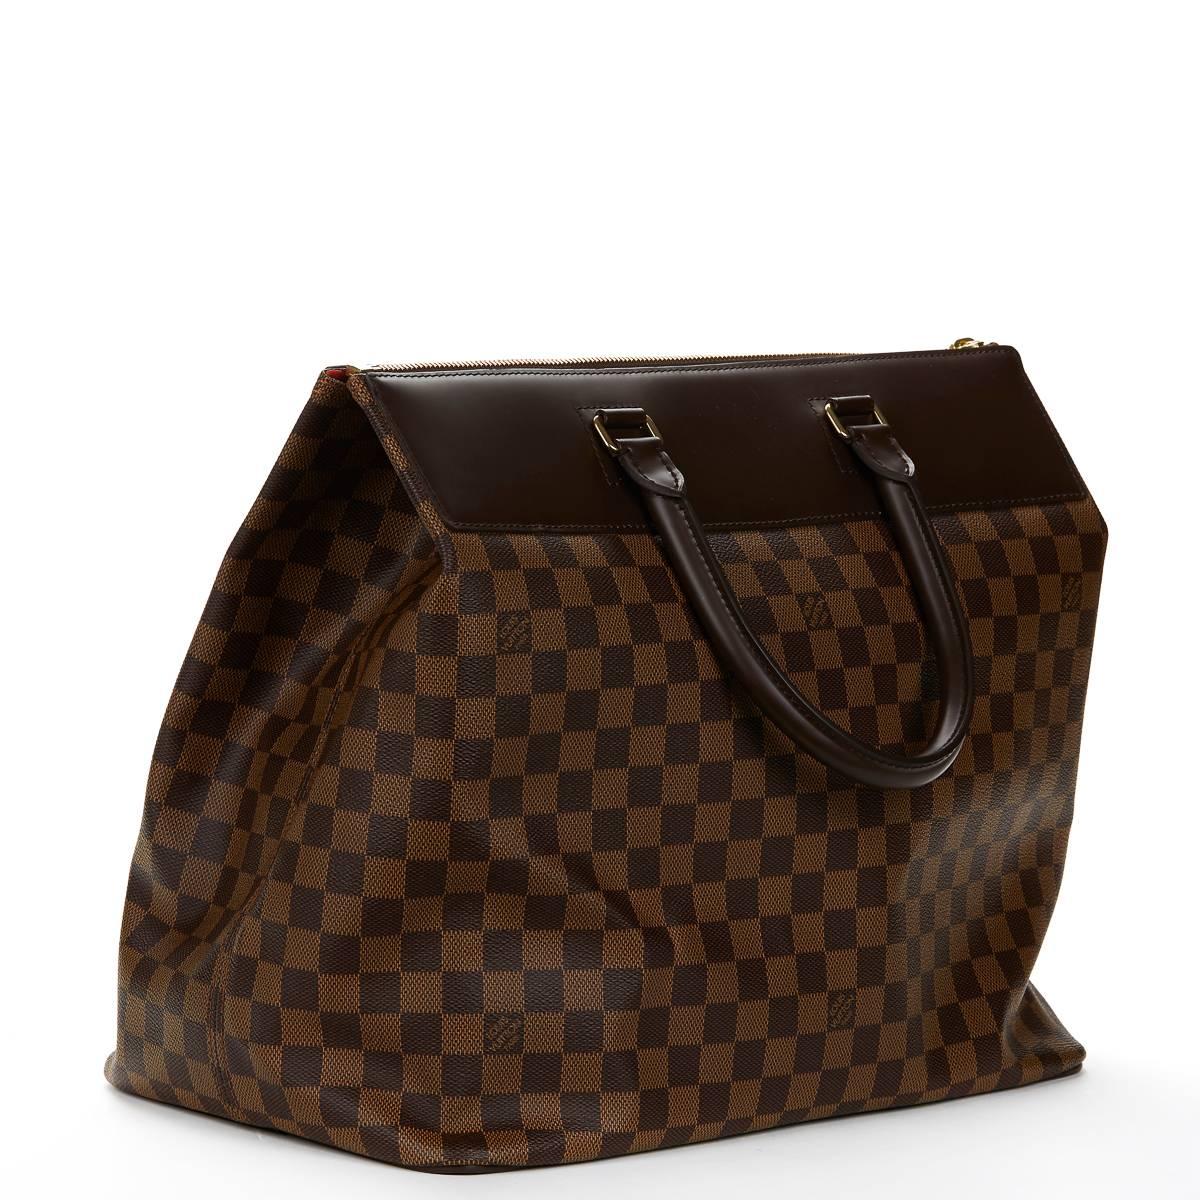 2000s Louis Vuitton Brown Damier Ebene Coated Canvas Greenwich PM 1